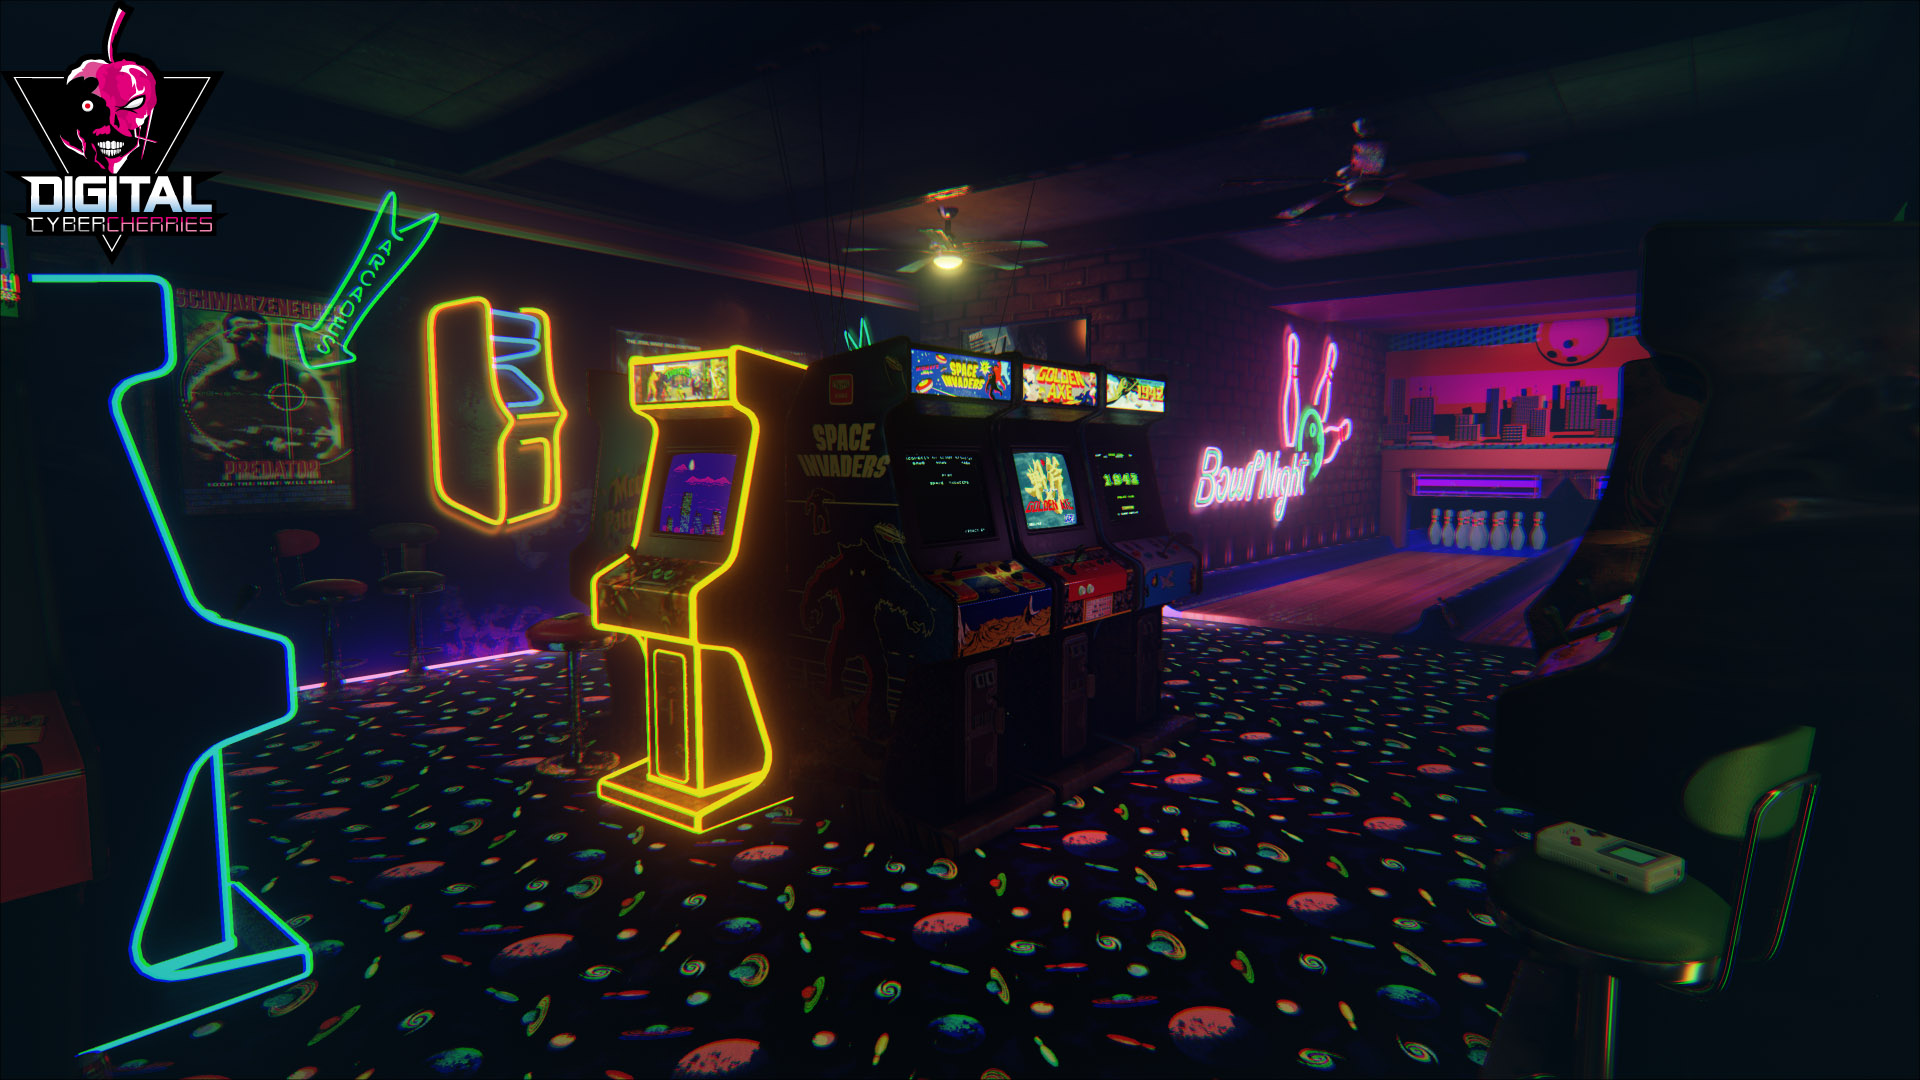  MAME Frontend Gives Gamers A Taste Of The Eighties Experience Page 1920x1080